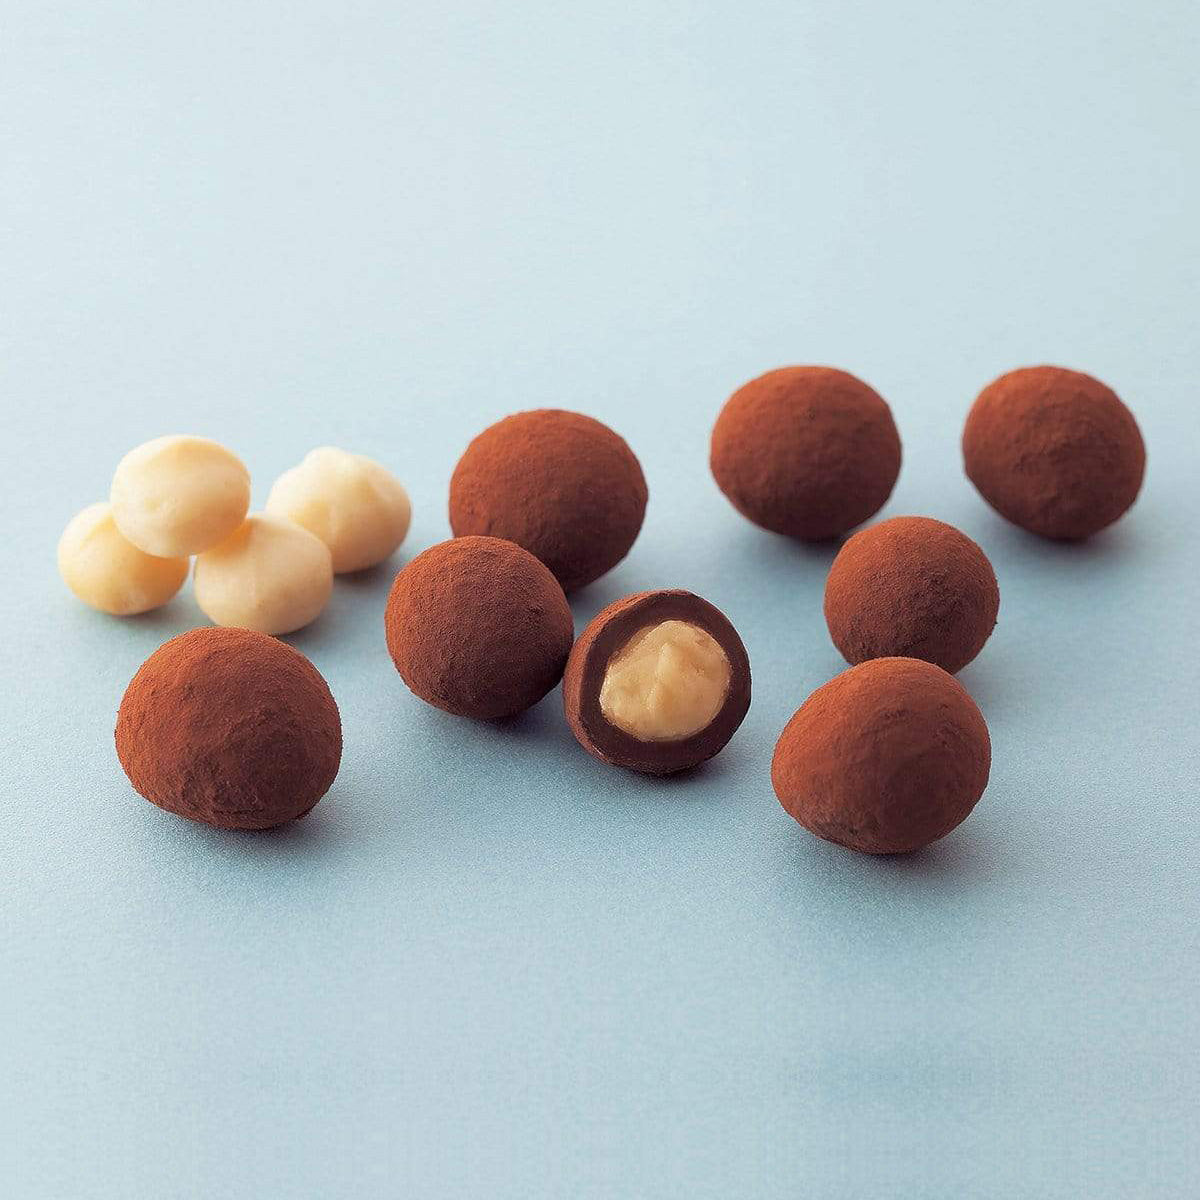 ROYCE' Chocolate - Macadamia Chocolate - Image shows brown chocolate-coated macadamia nuts on a blue surface background. Accents include macadamia nuts in yellow.